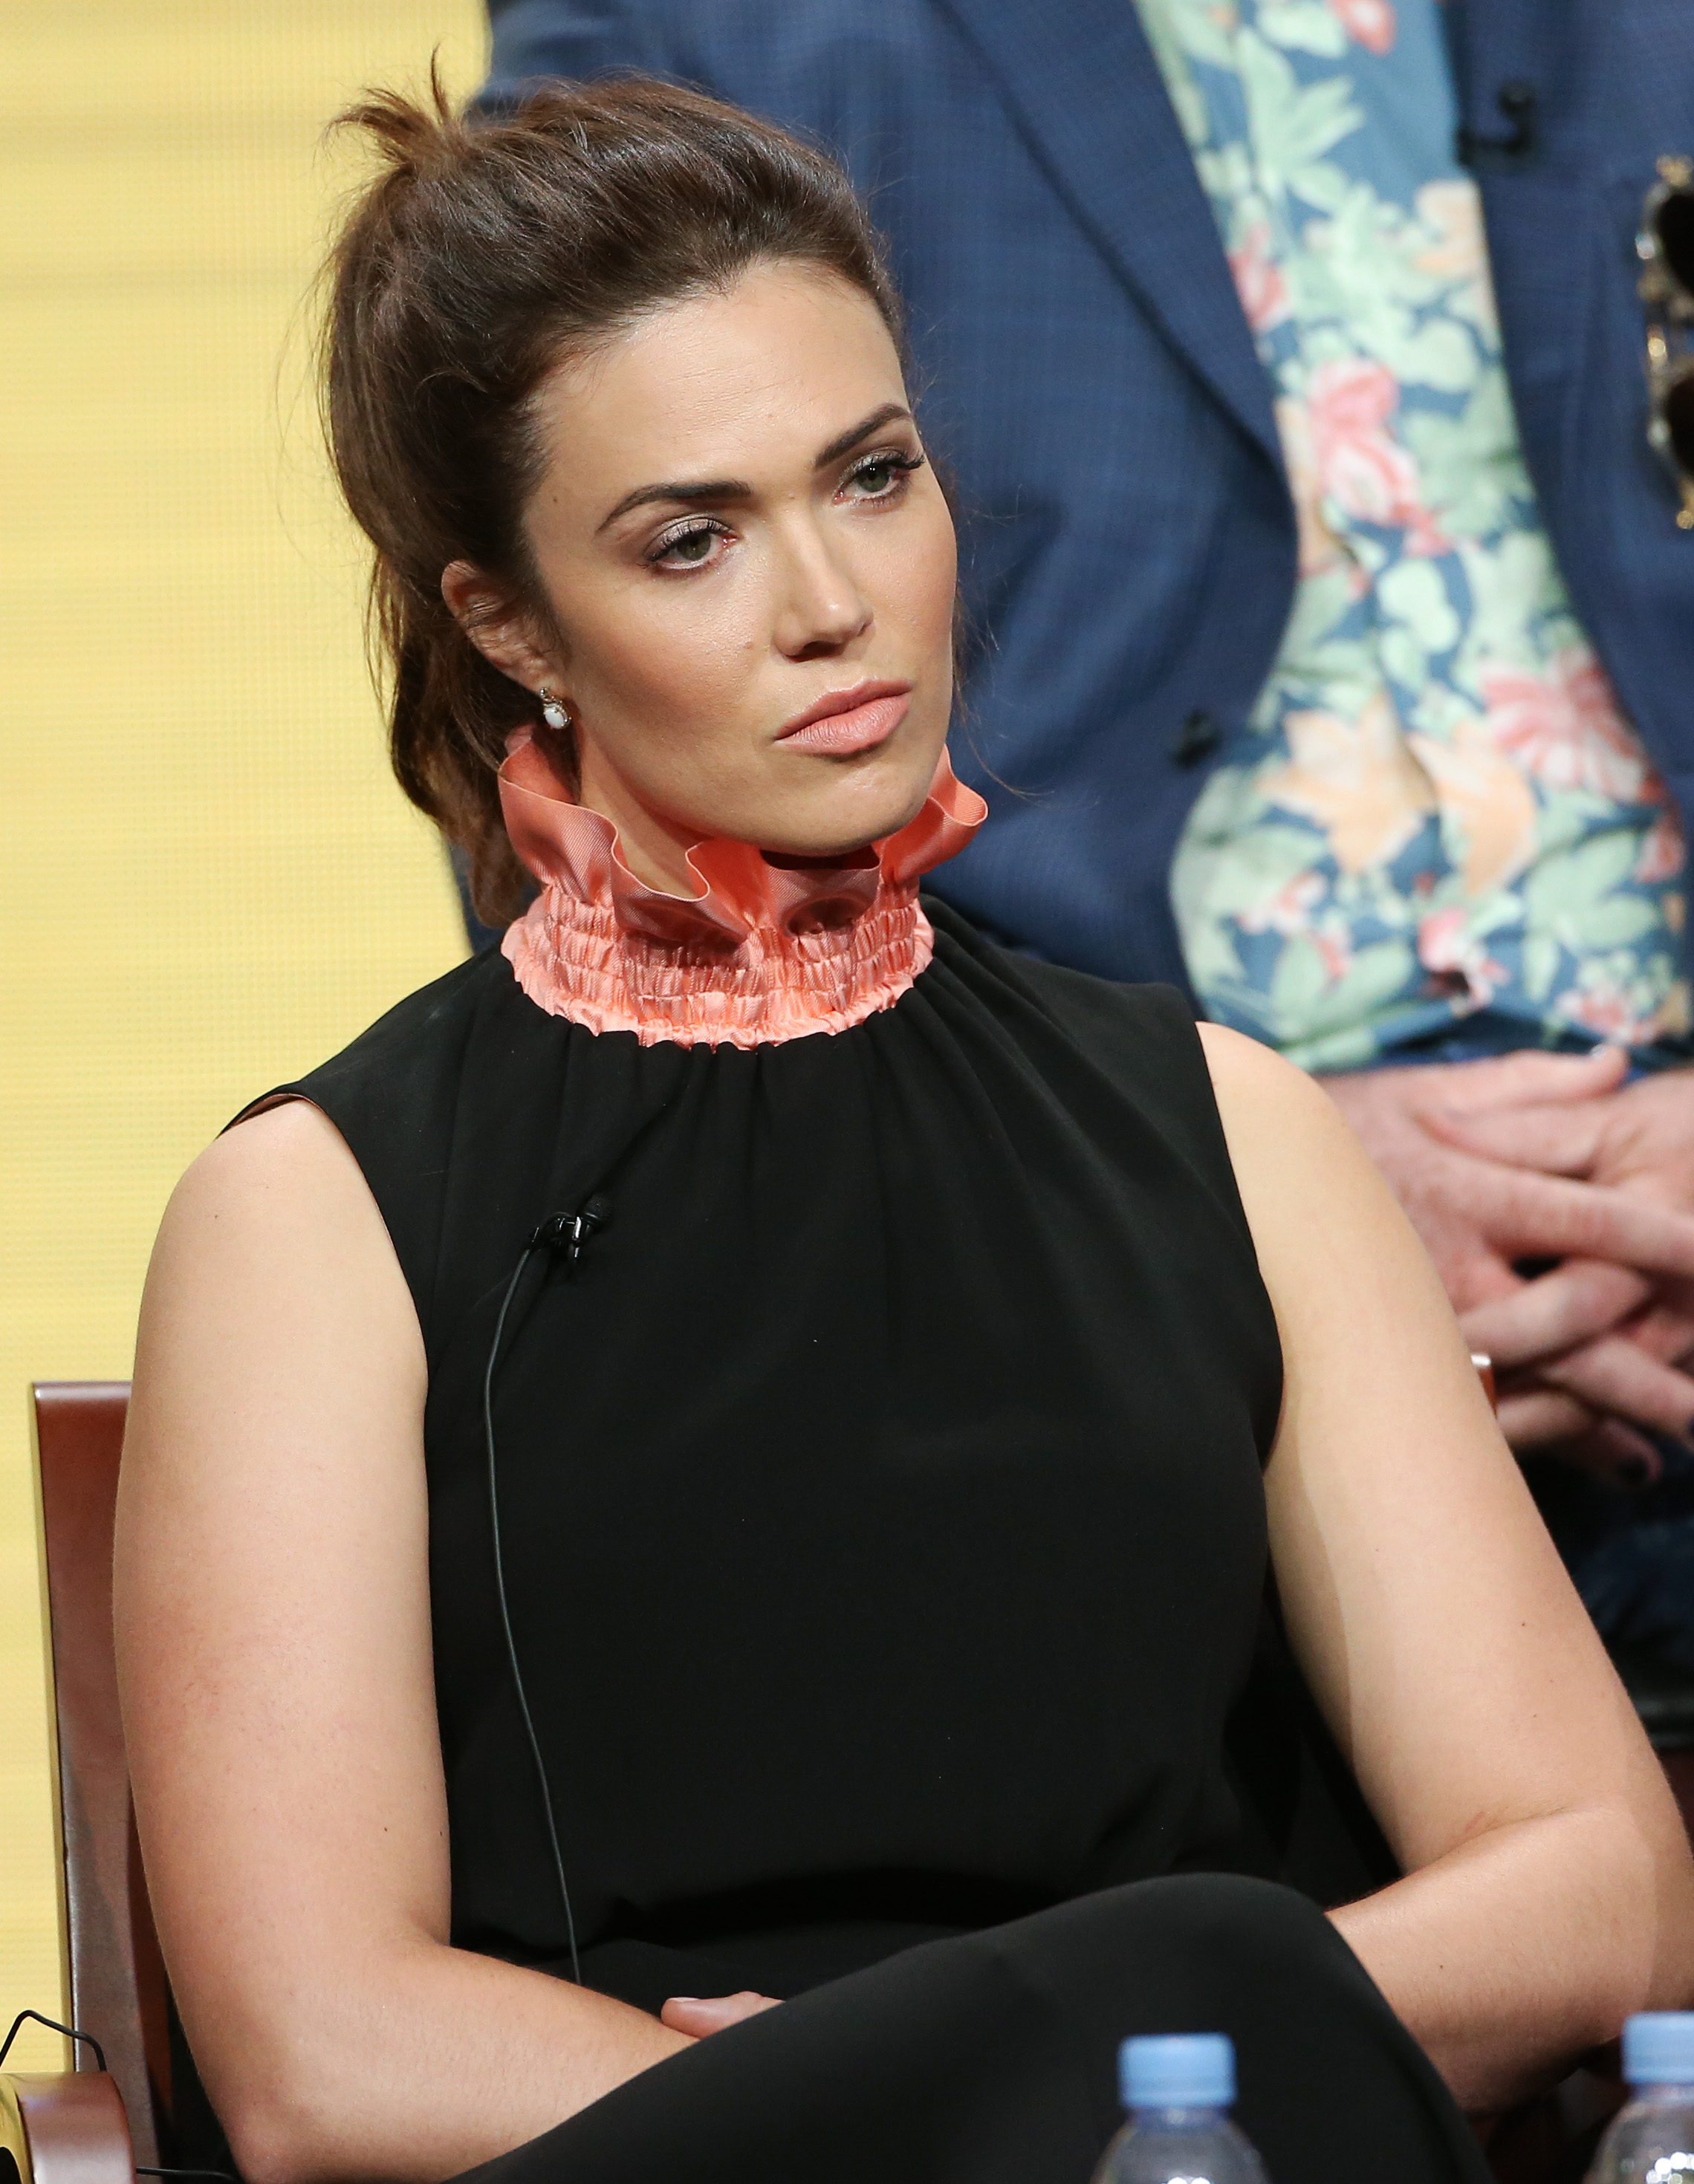 mandy-moore-this-is-us-panel-tca-summer-press-tour-los-angeles-august-3rd-2017-1.jpg